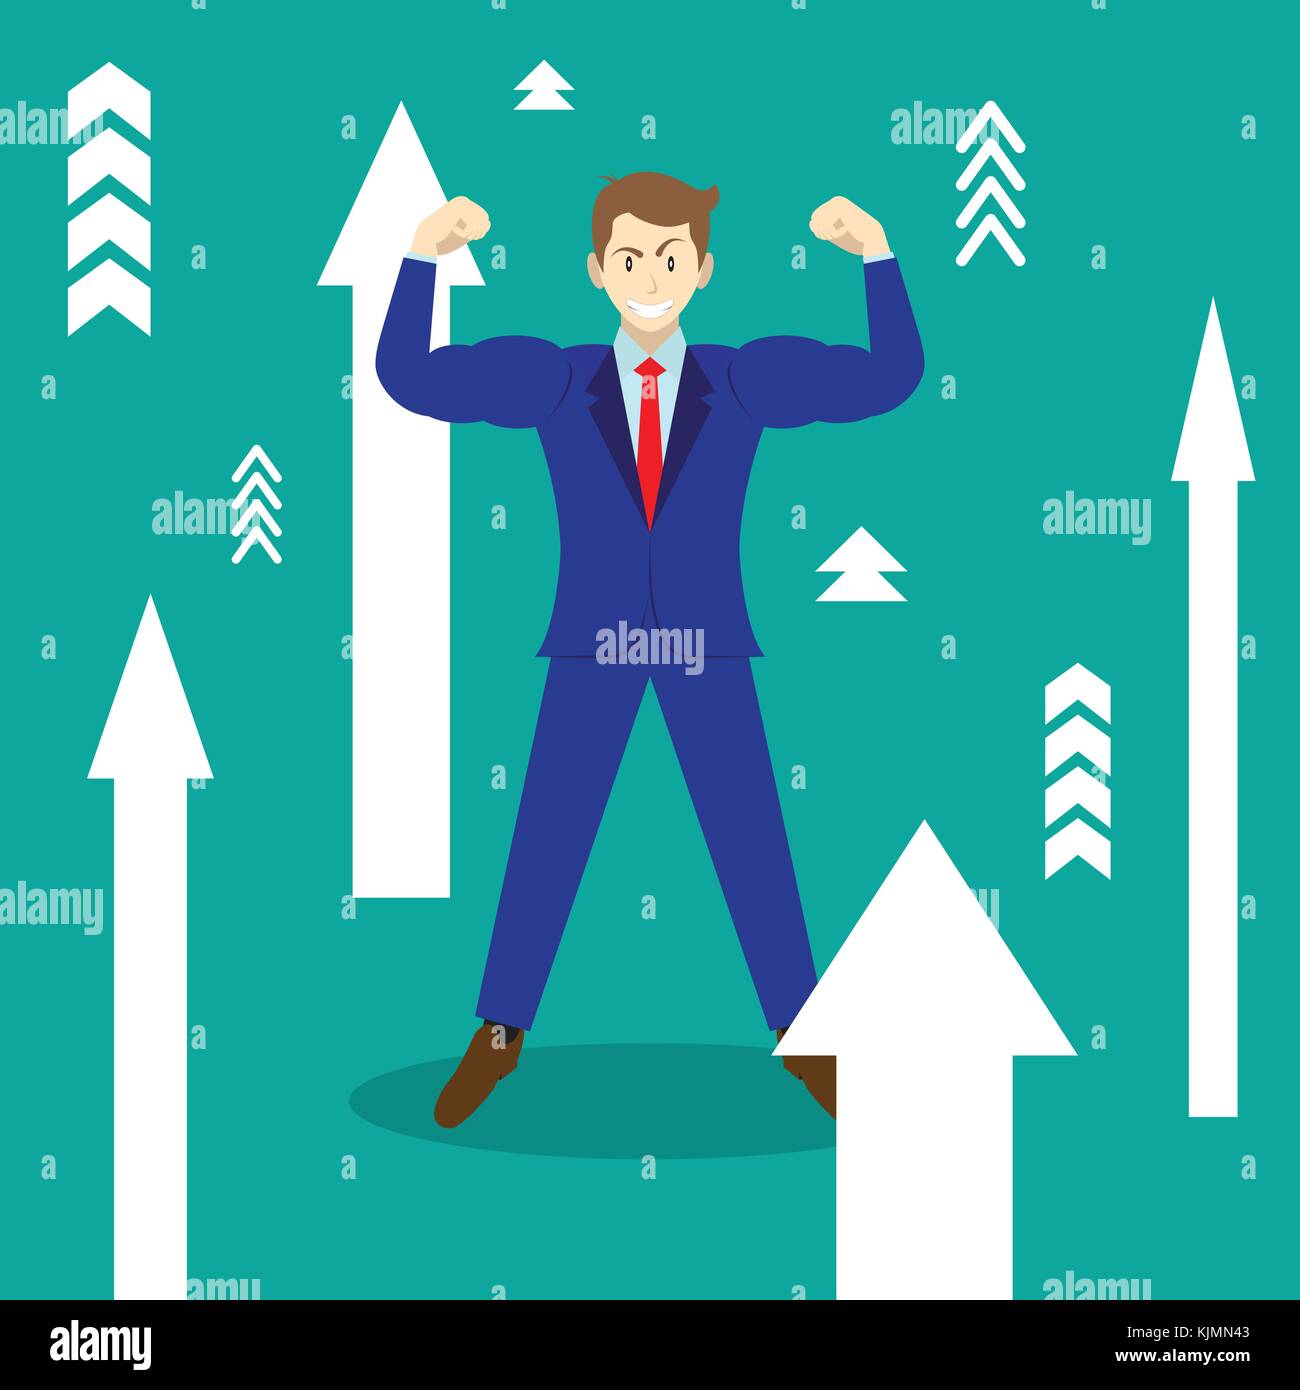 Business Concept As A Full-Energy Muscular Businessman Is Standing Among White Upward Arrows. It Means Enhancing, Strengthening Self Performance. Stock Vector